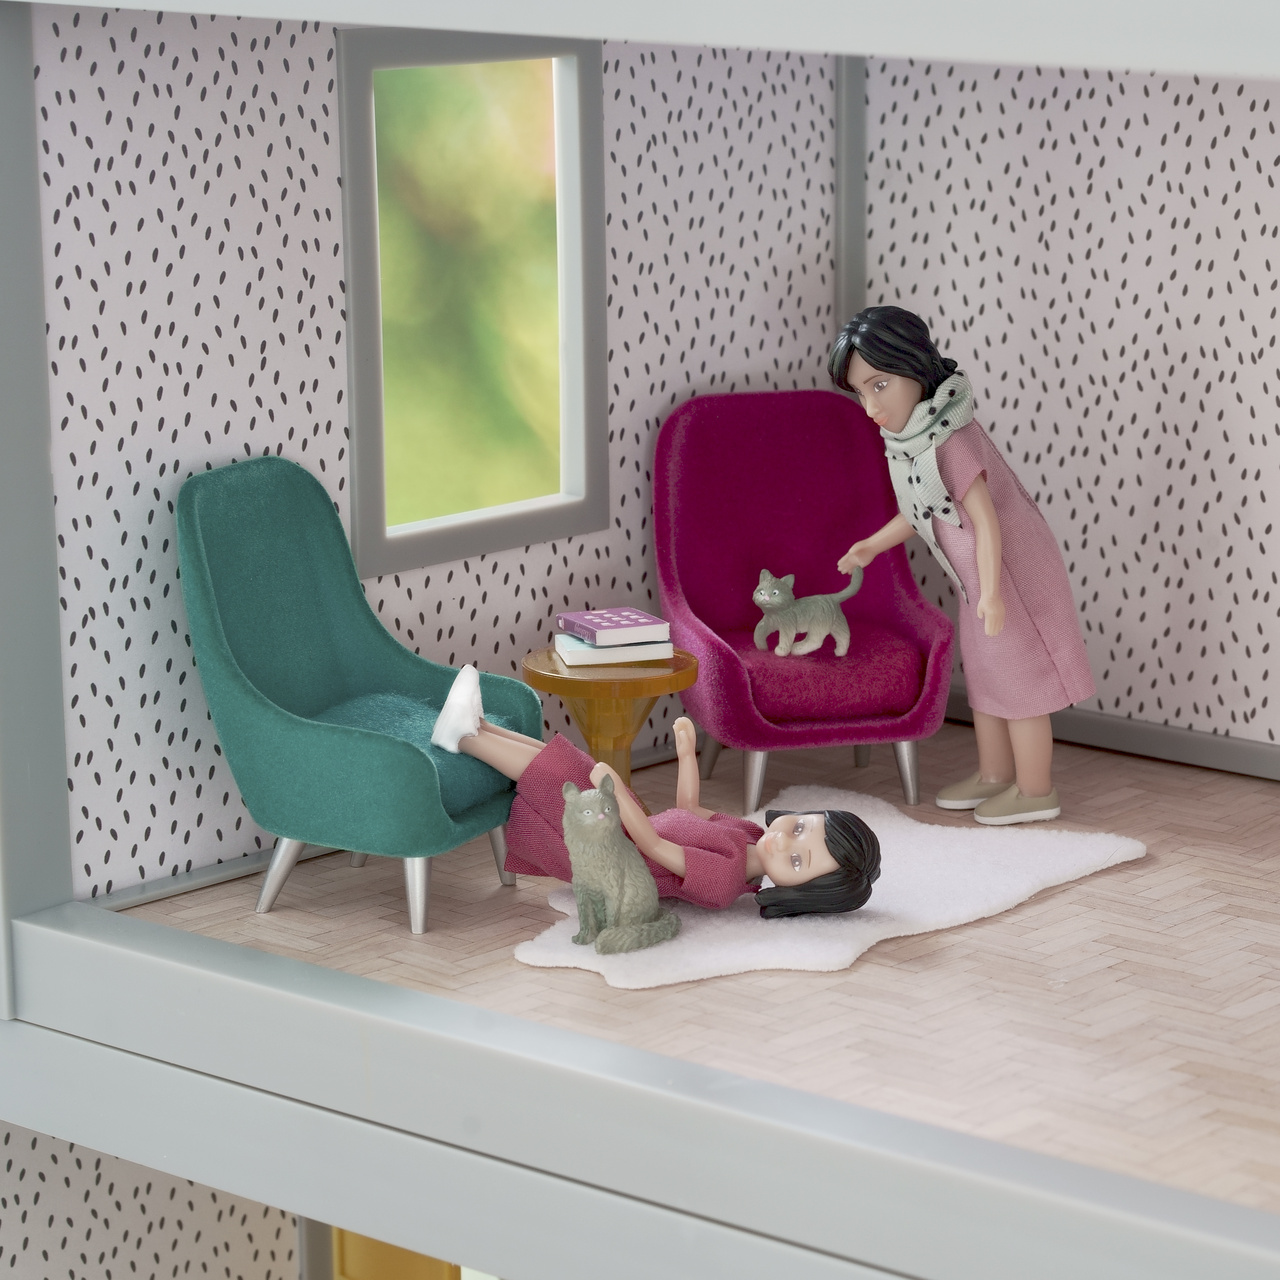 Doll house furniture & doll house accessories lundby dollhouse furniture armchair set